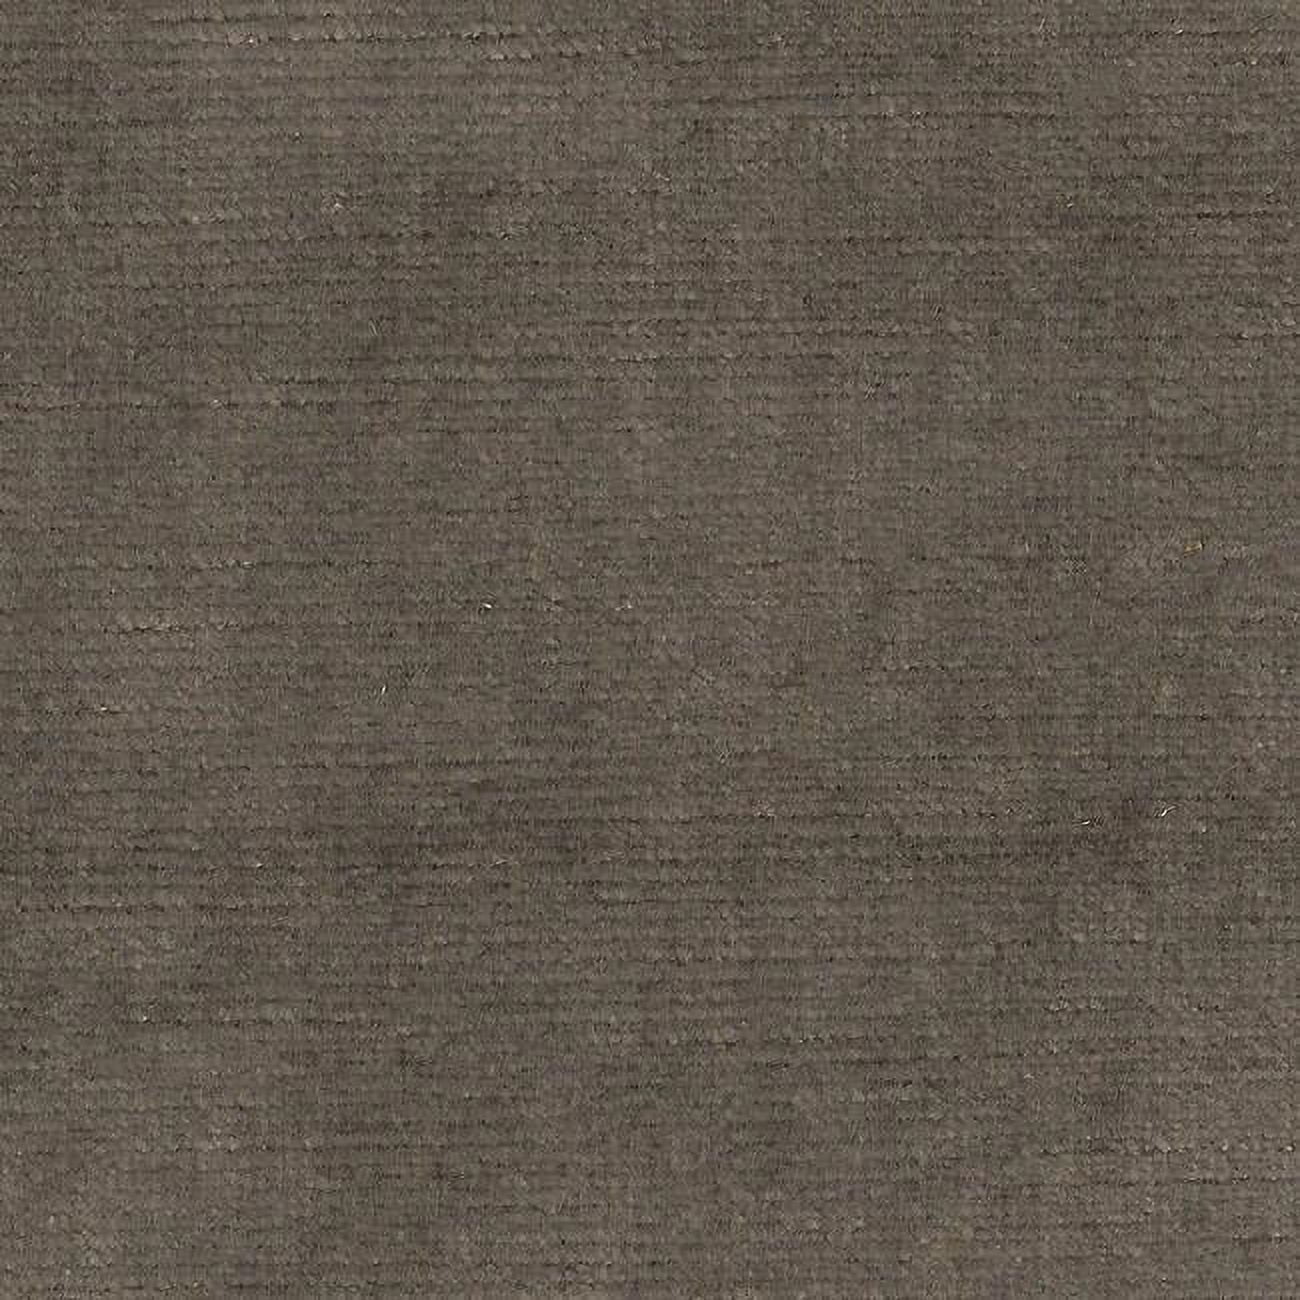 Picture of American Silk 3731 55 in. Brussels Beautifuly Curated Velvet Fabric Cloth, Taupe